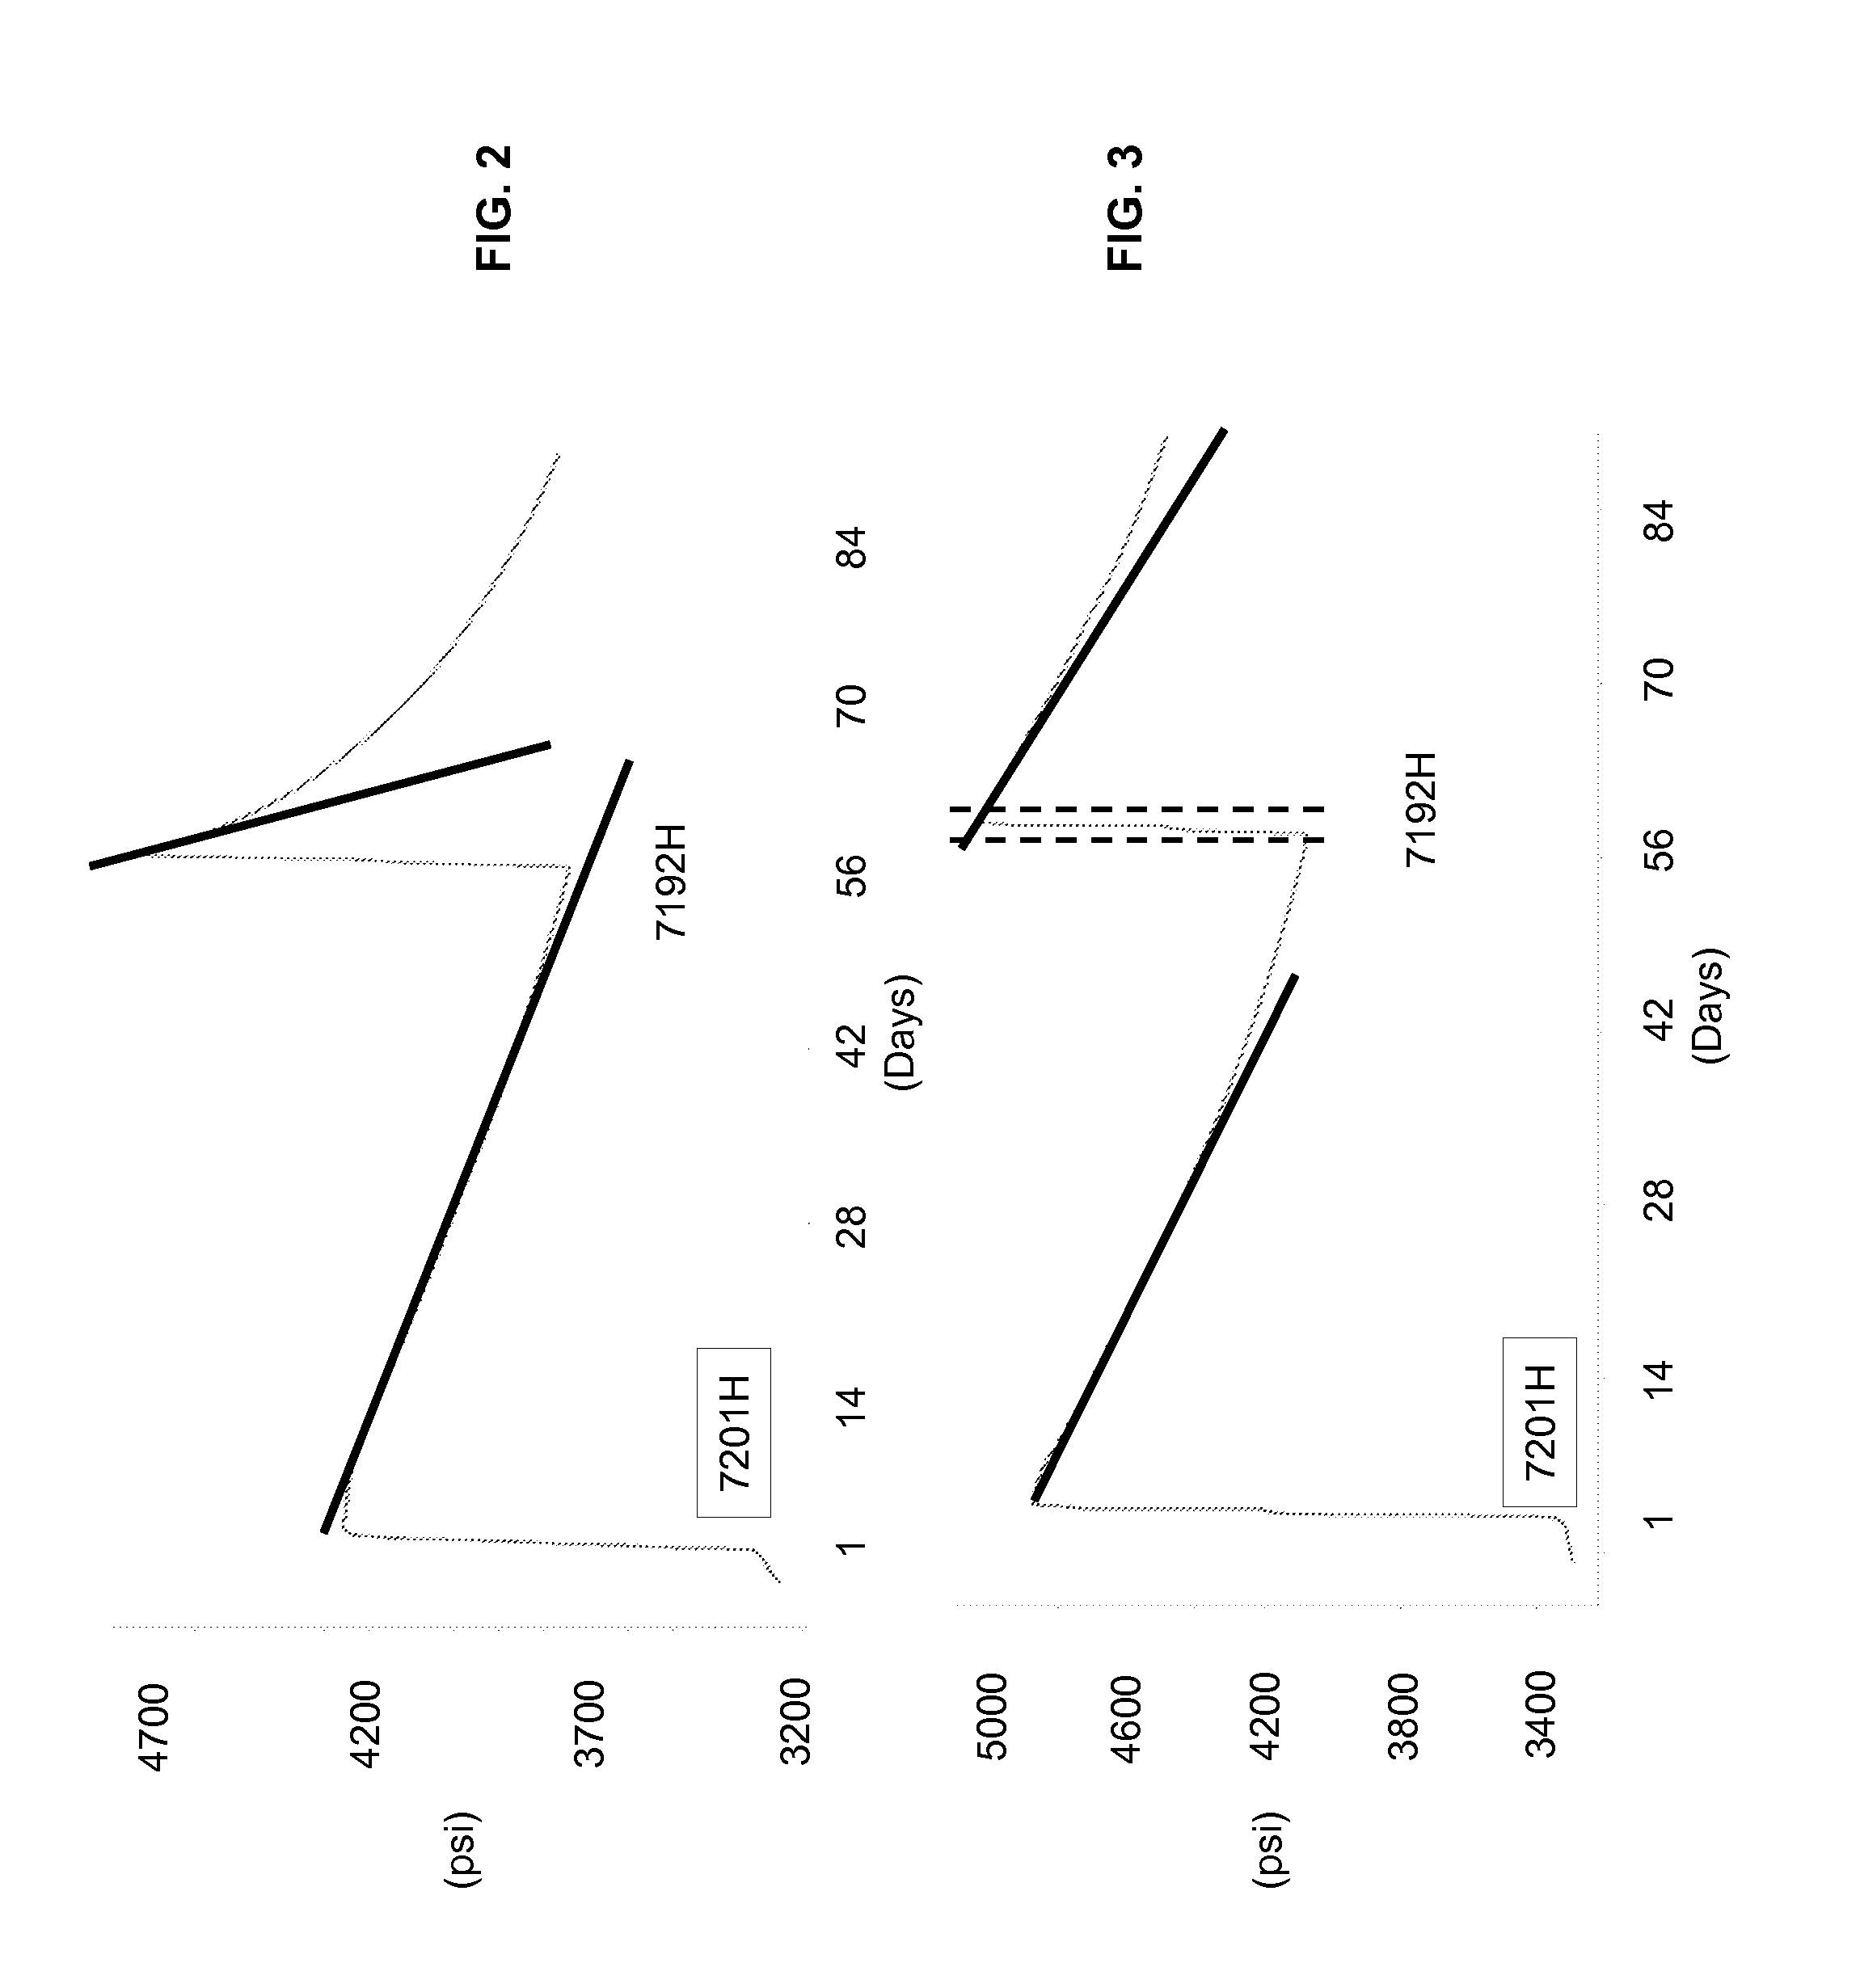 Method for determining hydraulic fracture orientation and dimension